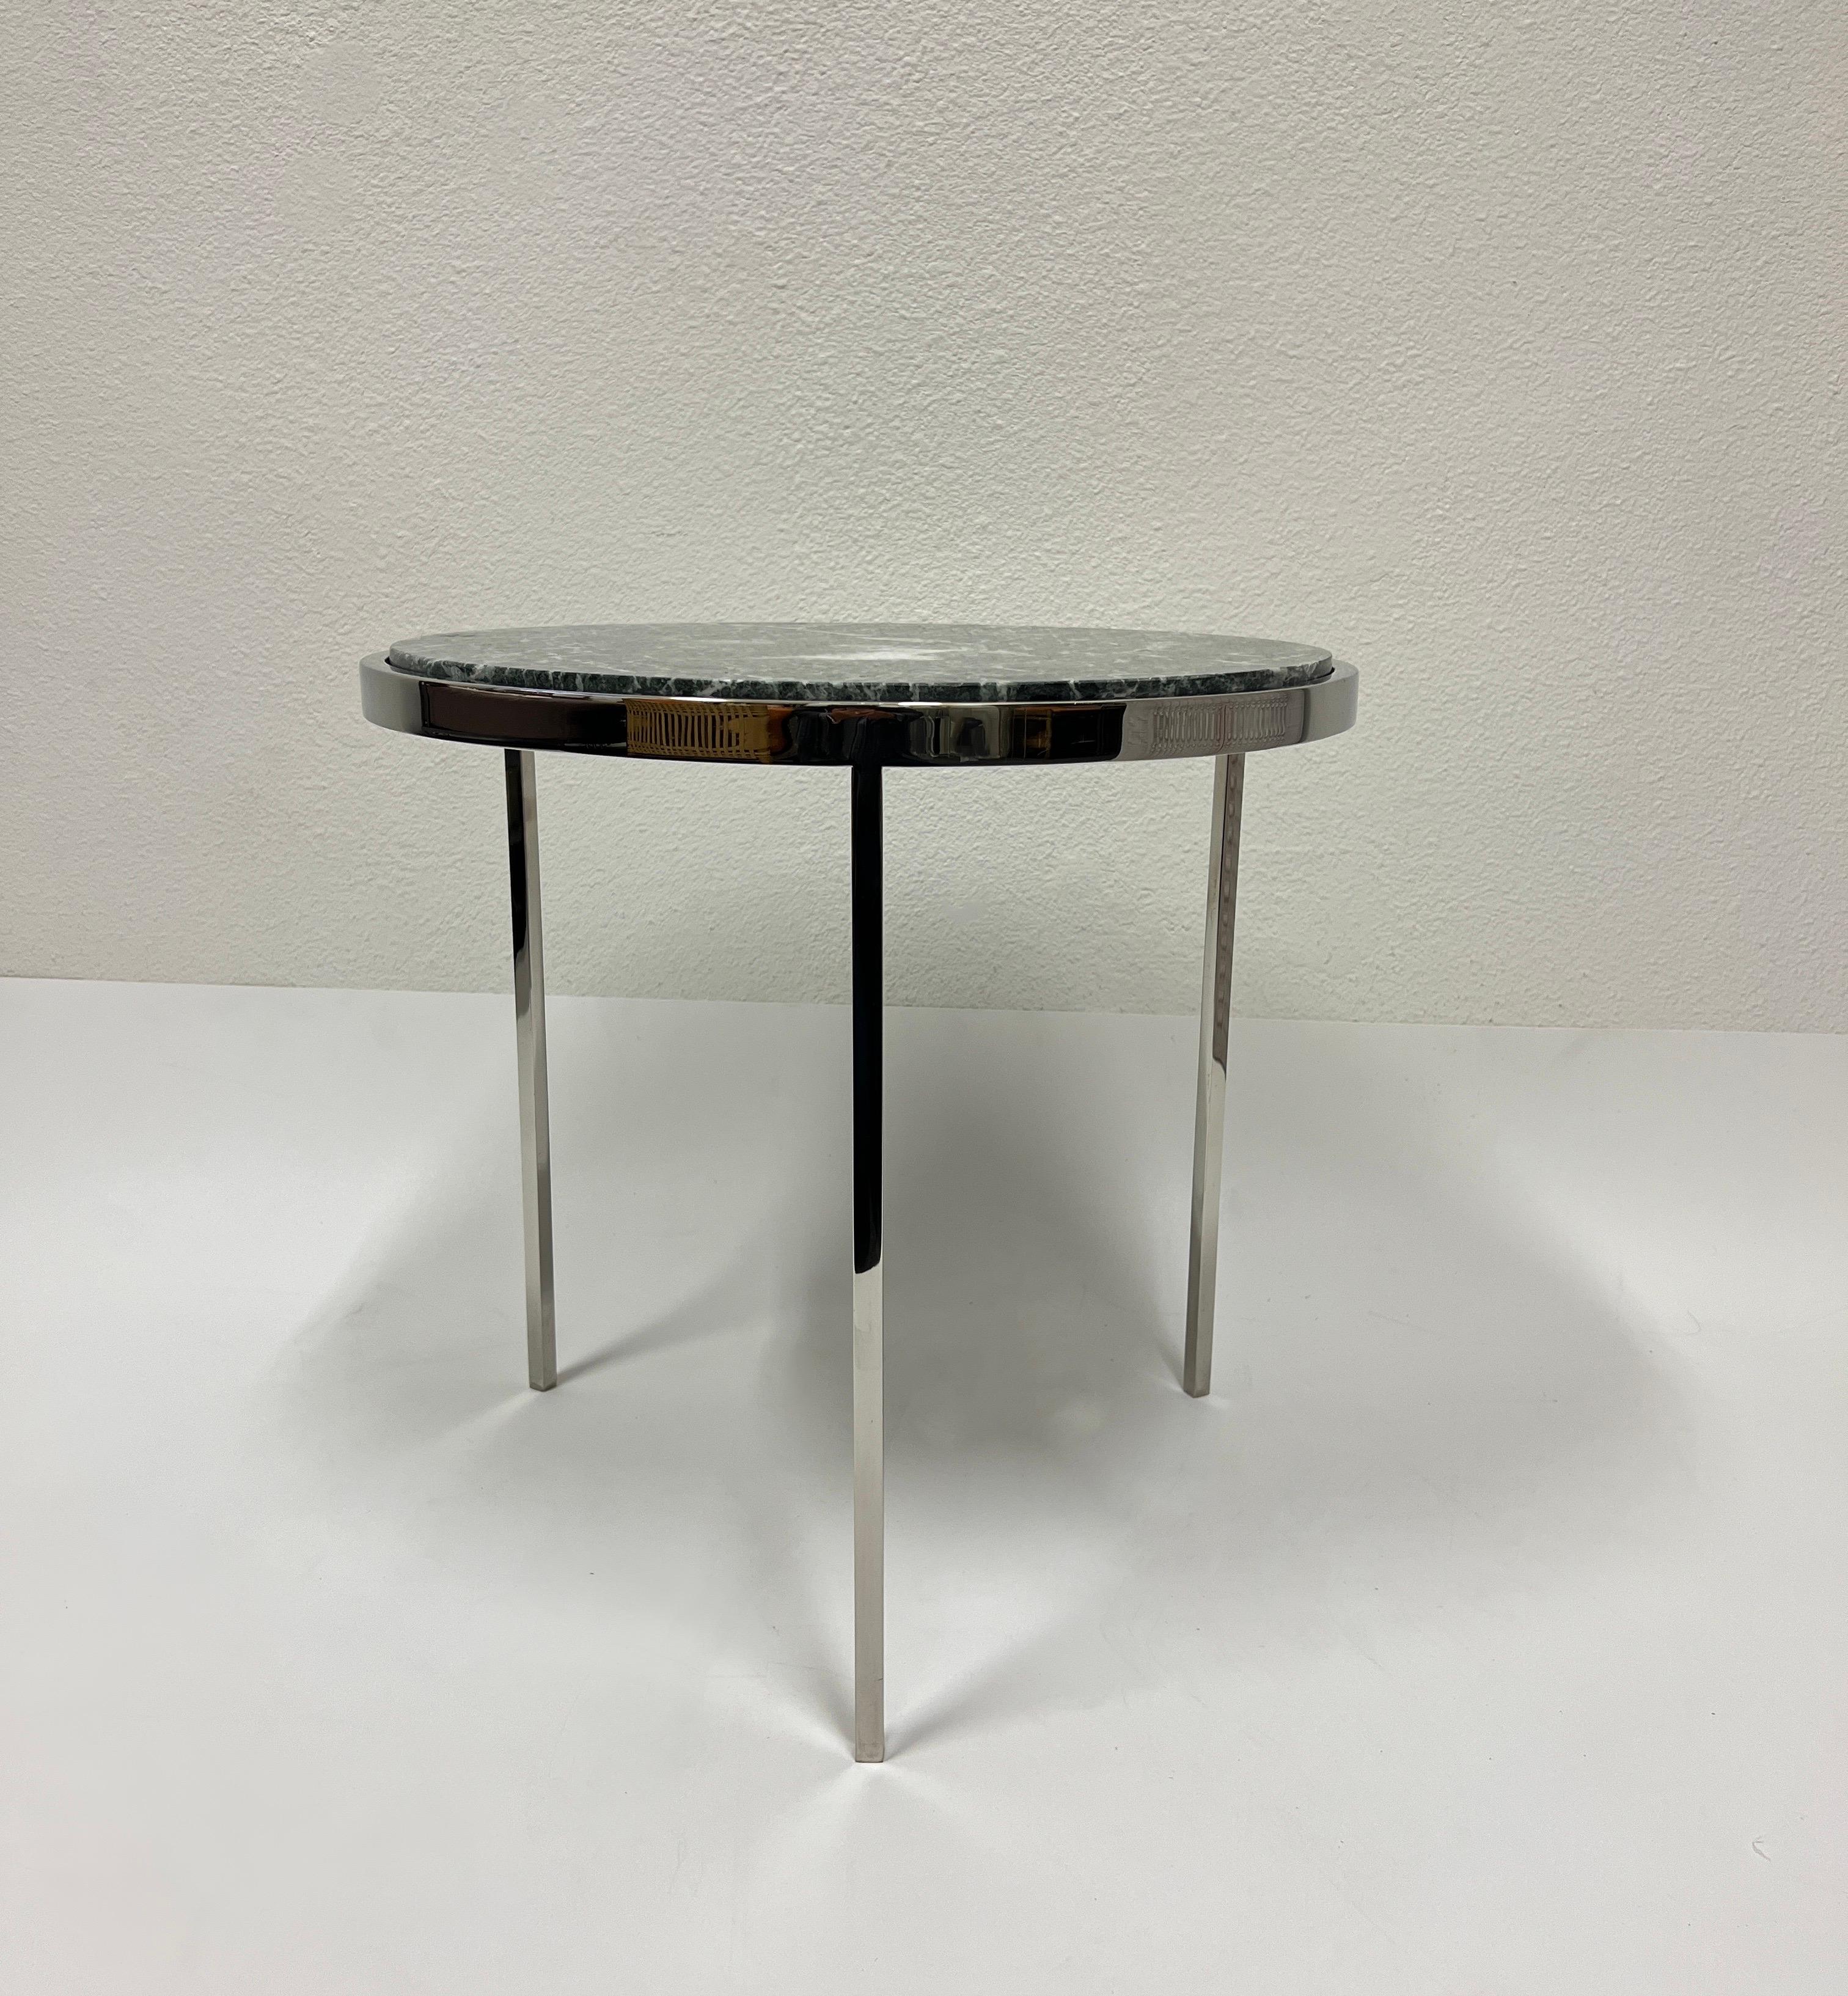 1980’s Round tripod solid polished stainless steel with a green marble top side table by Brueton.
In beautiful original vintage condition.
Measurements: 19.13” Diameter, 18.25” High.